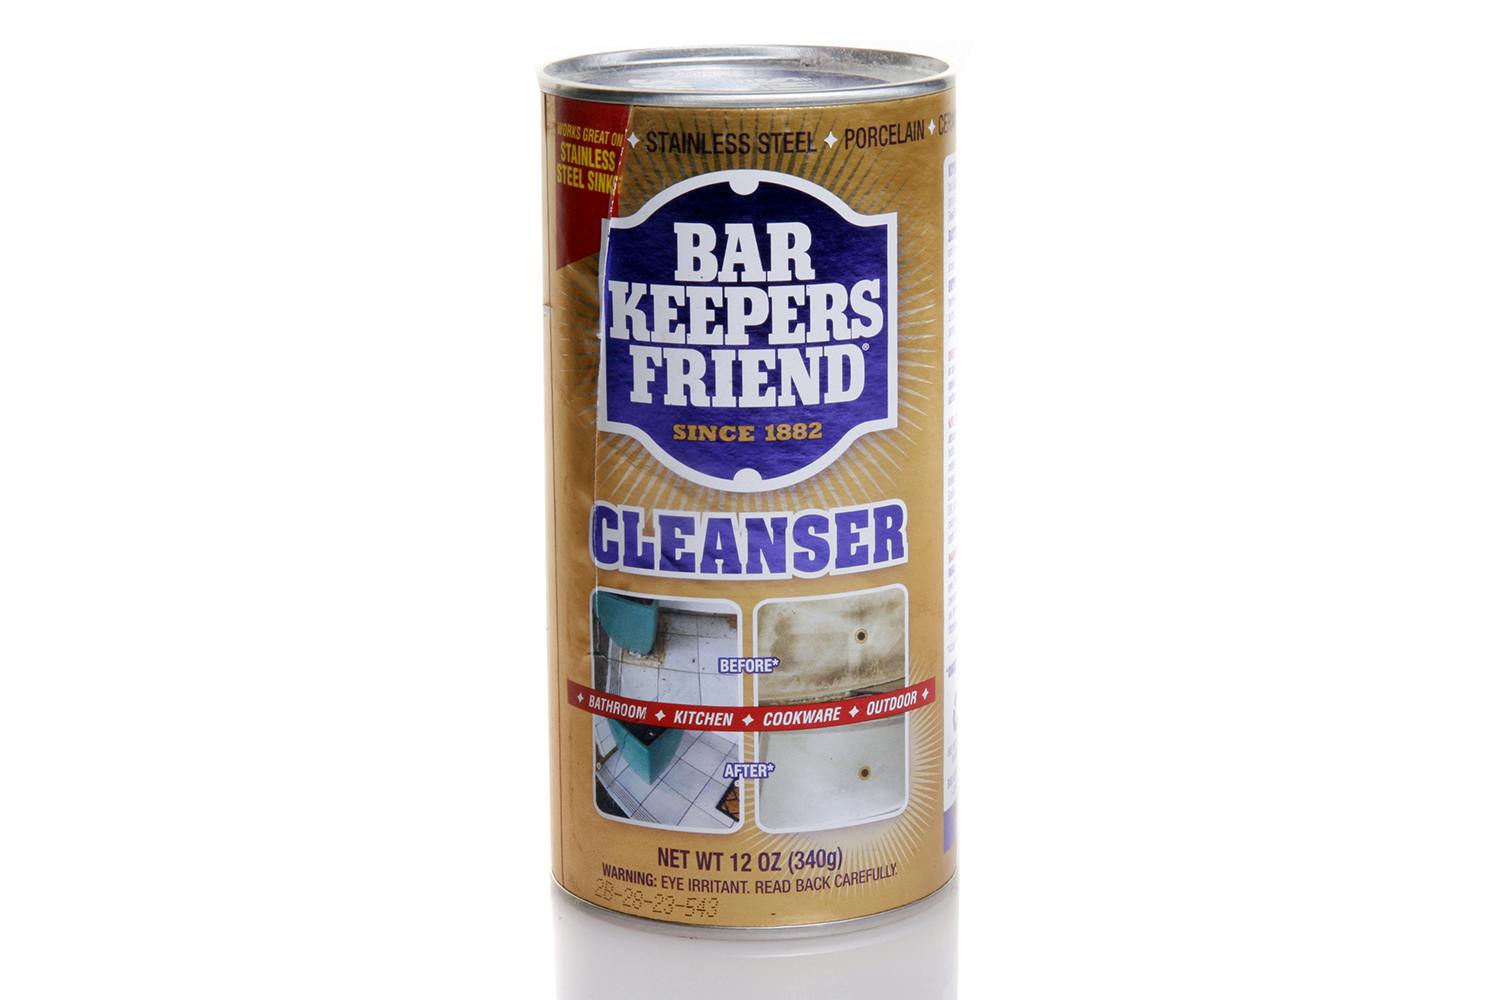 Canister of Bar Keepers Friend, brand cleanser